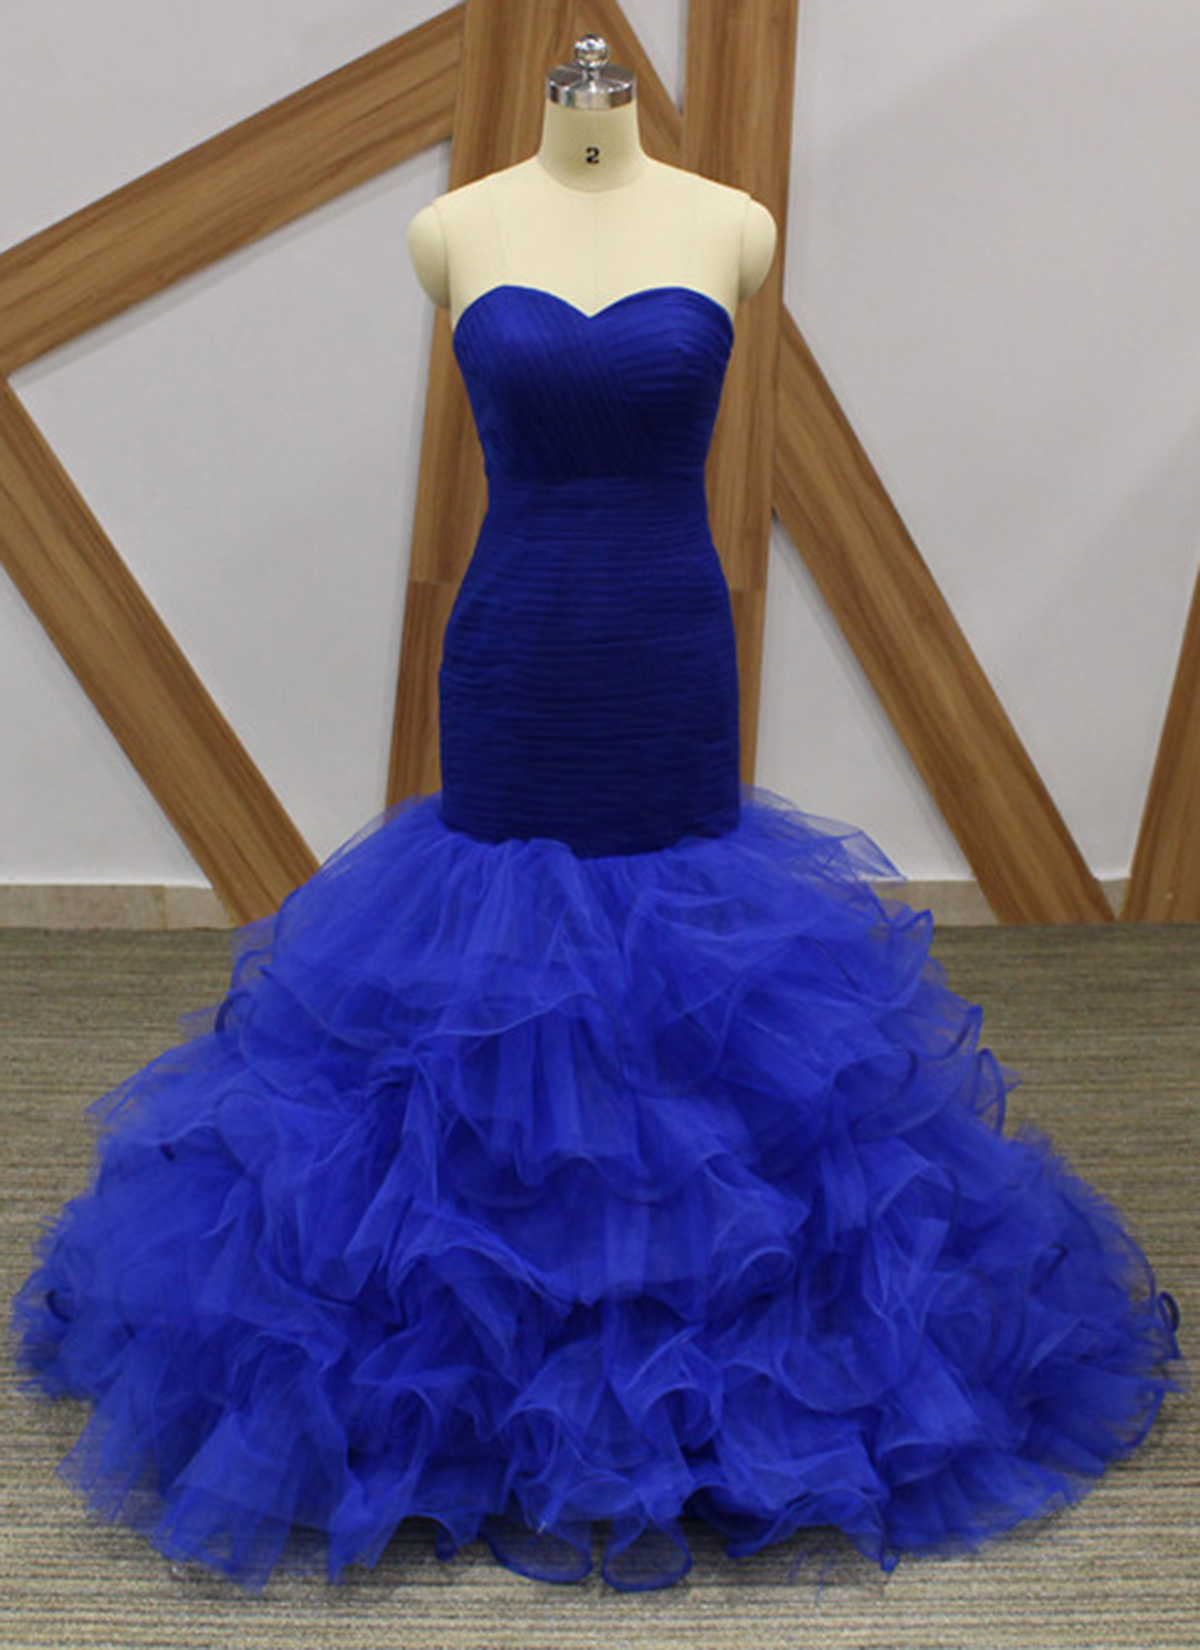 Elegant Royal Blue Ruffle Mermaid Prom Dresses With Skirts Tiers Plus Size Prom Party Gowns ,custom Made Formal Evening Dress